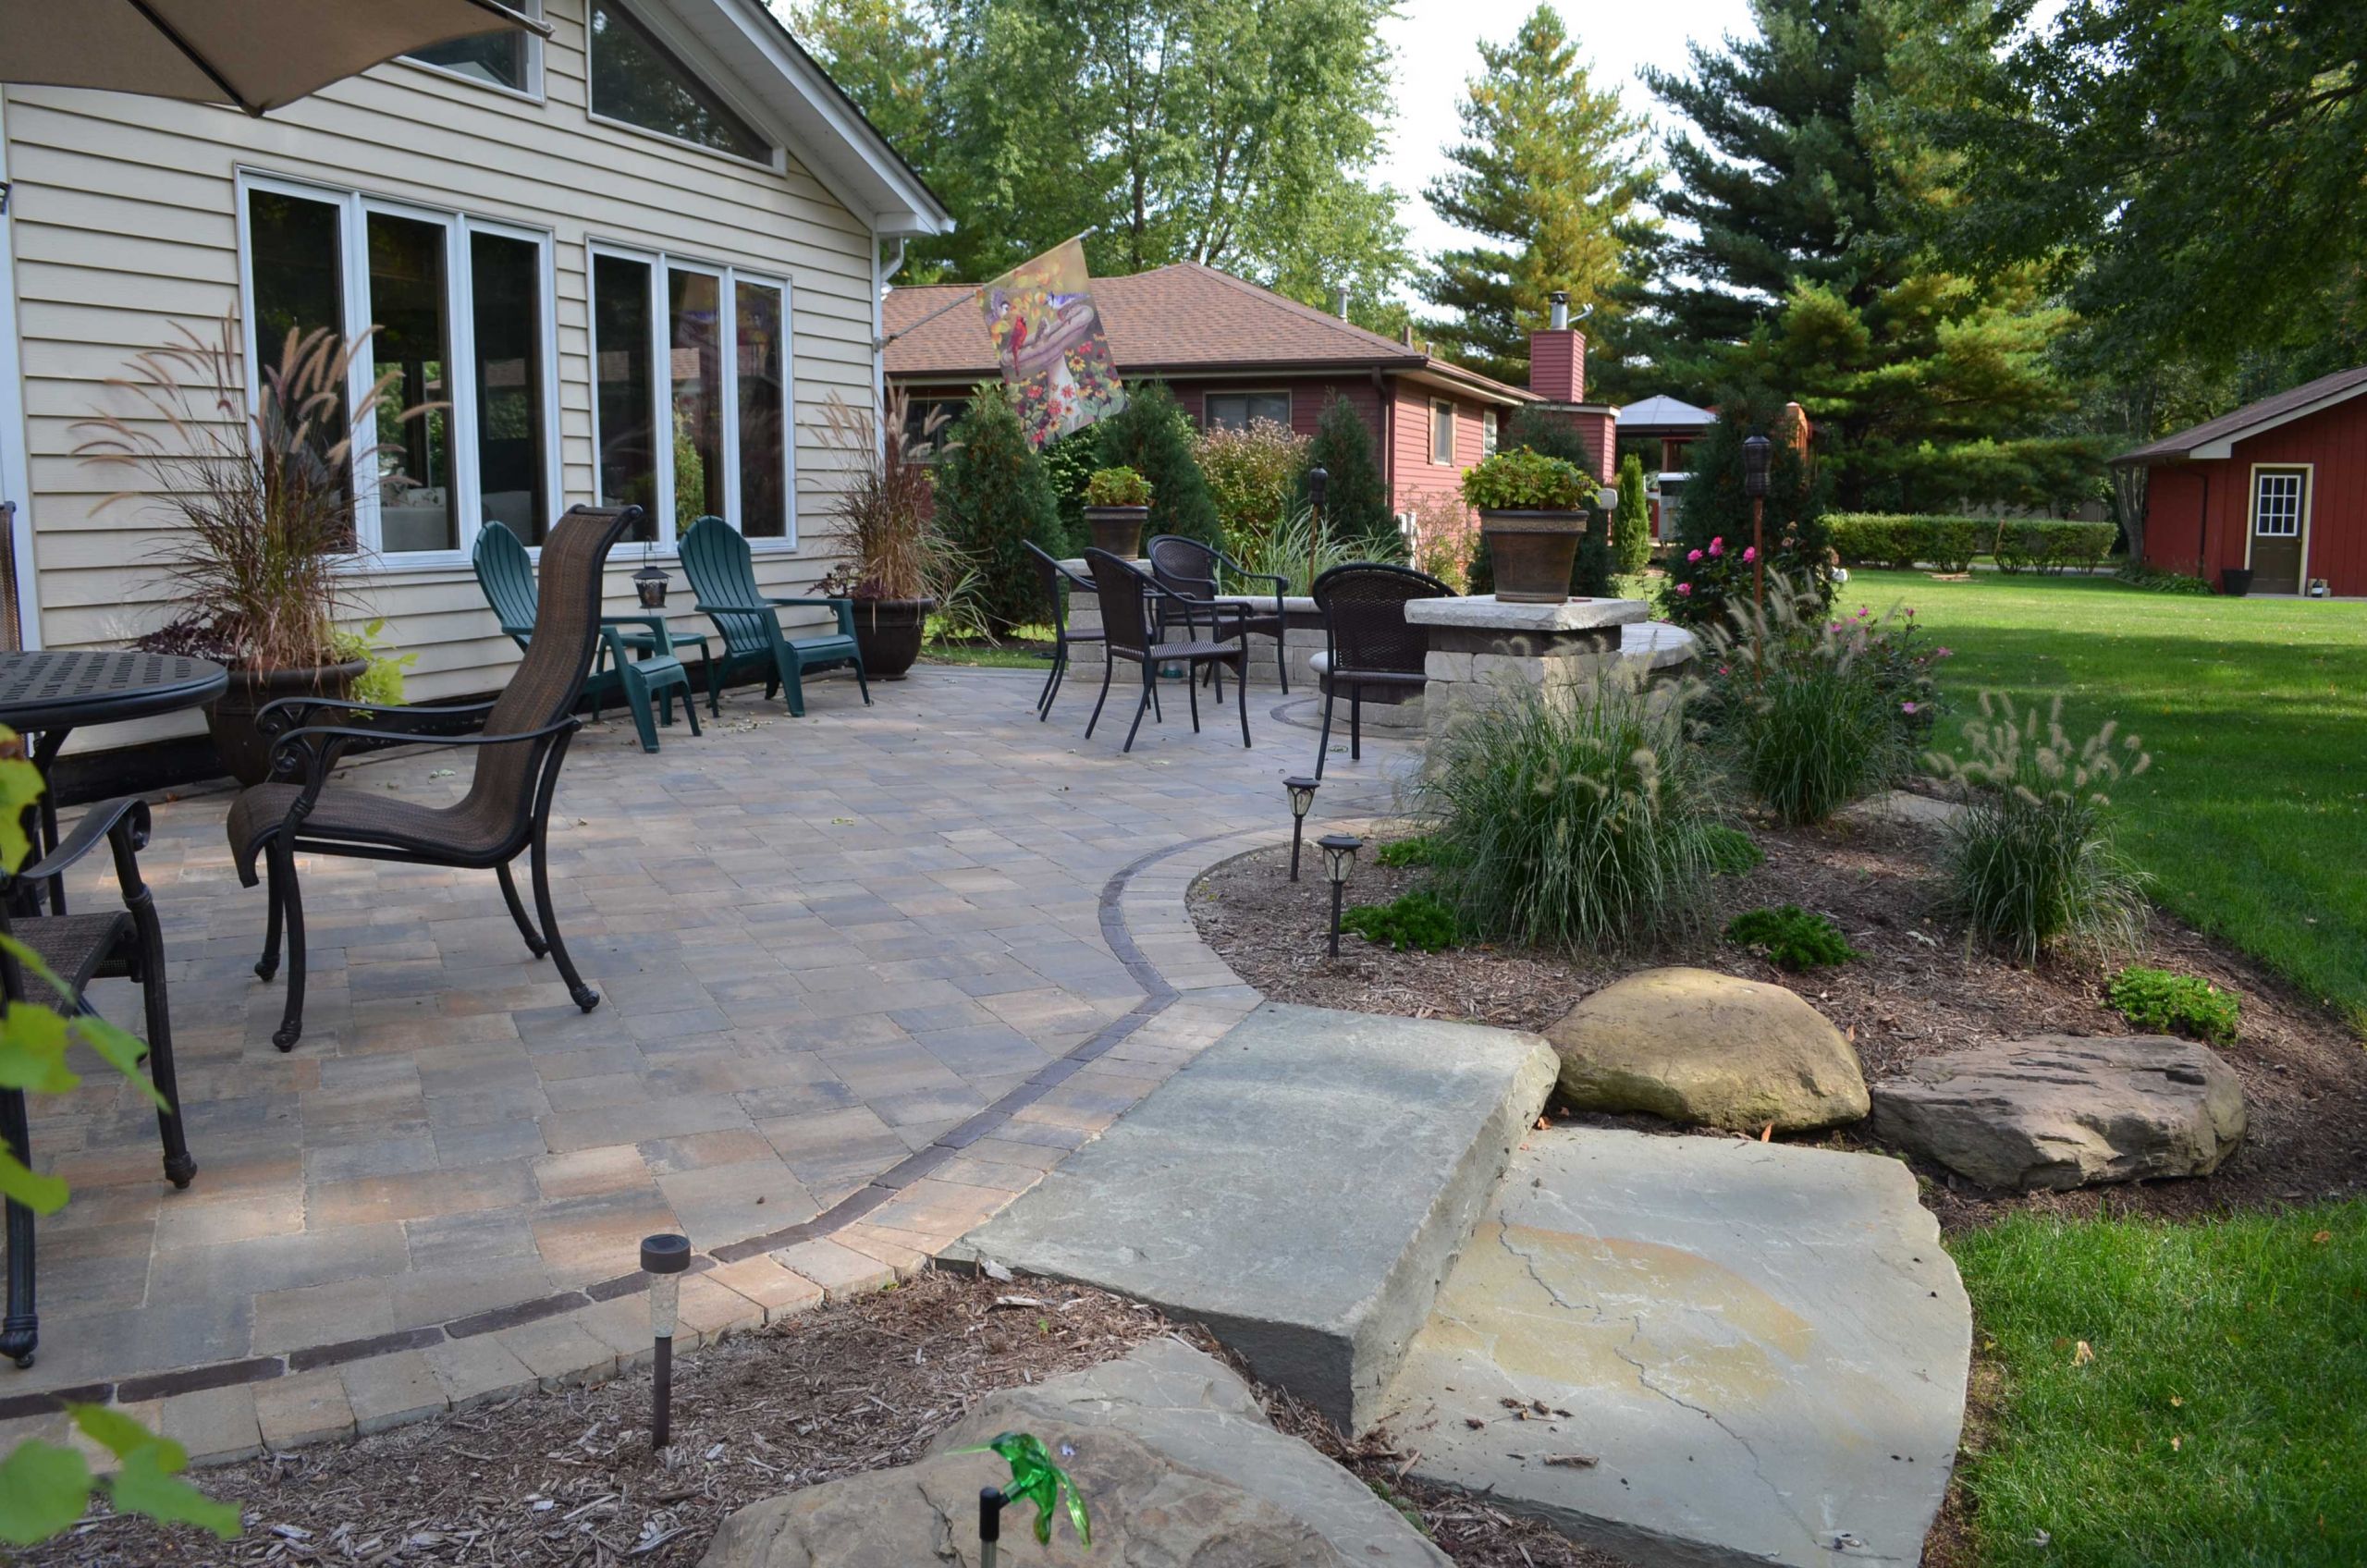 Backyard Deck And Patio Ideas
 4 Reasons to Replace Your Wooden Deck with a Paver Patio